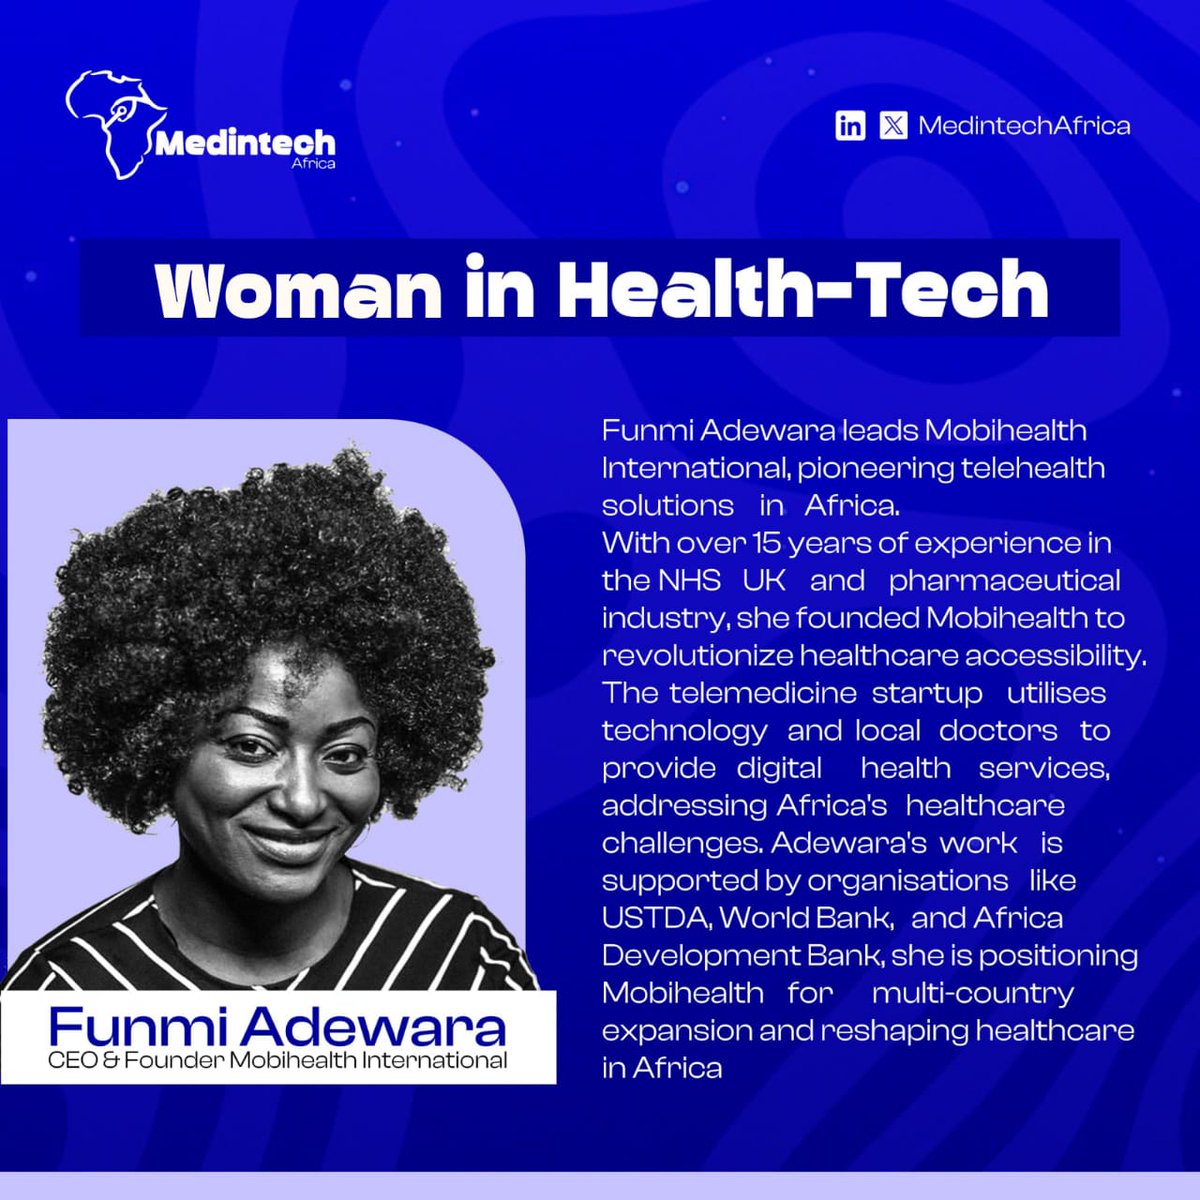 @justsay_didi, @jennienwokoye, & @funmi_adewara, your respective innovations have made access to healthcare a little more convenient and wholesome. Thank you!